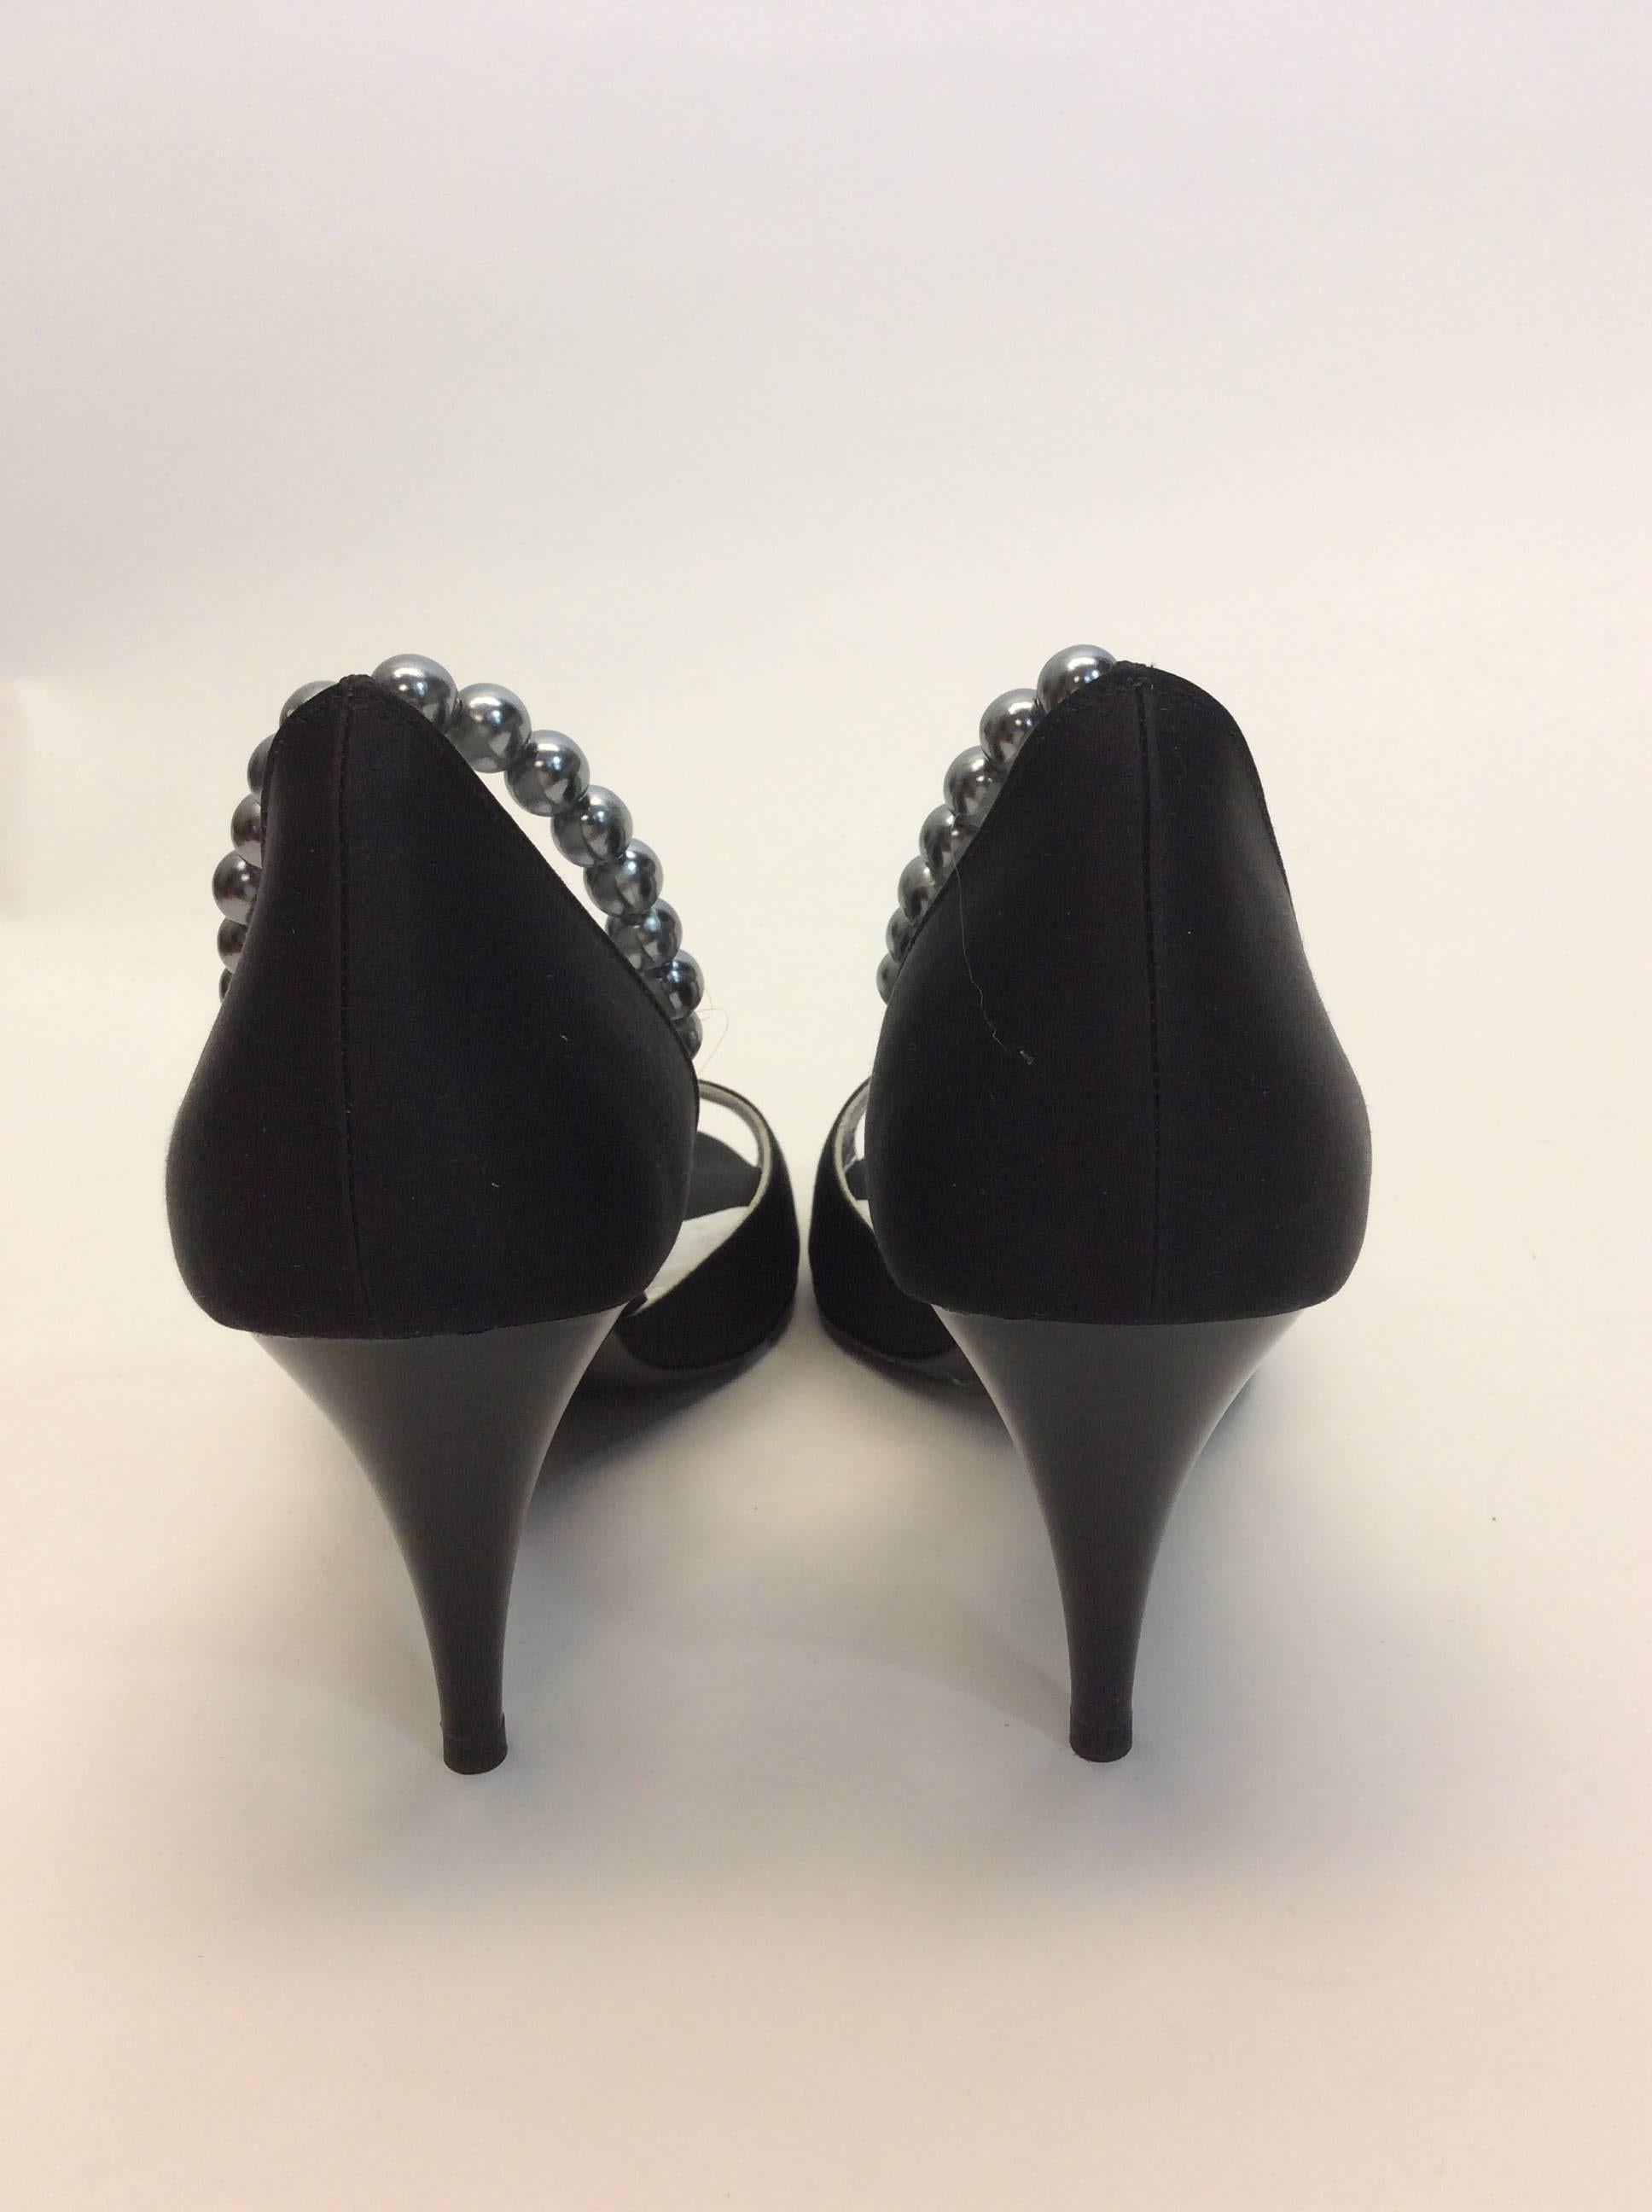 Chanel Black Satin Peep Toe Pump With Pearl Ankle Strap In Excellent Condition For Sale In Narberth, PA